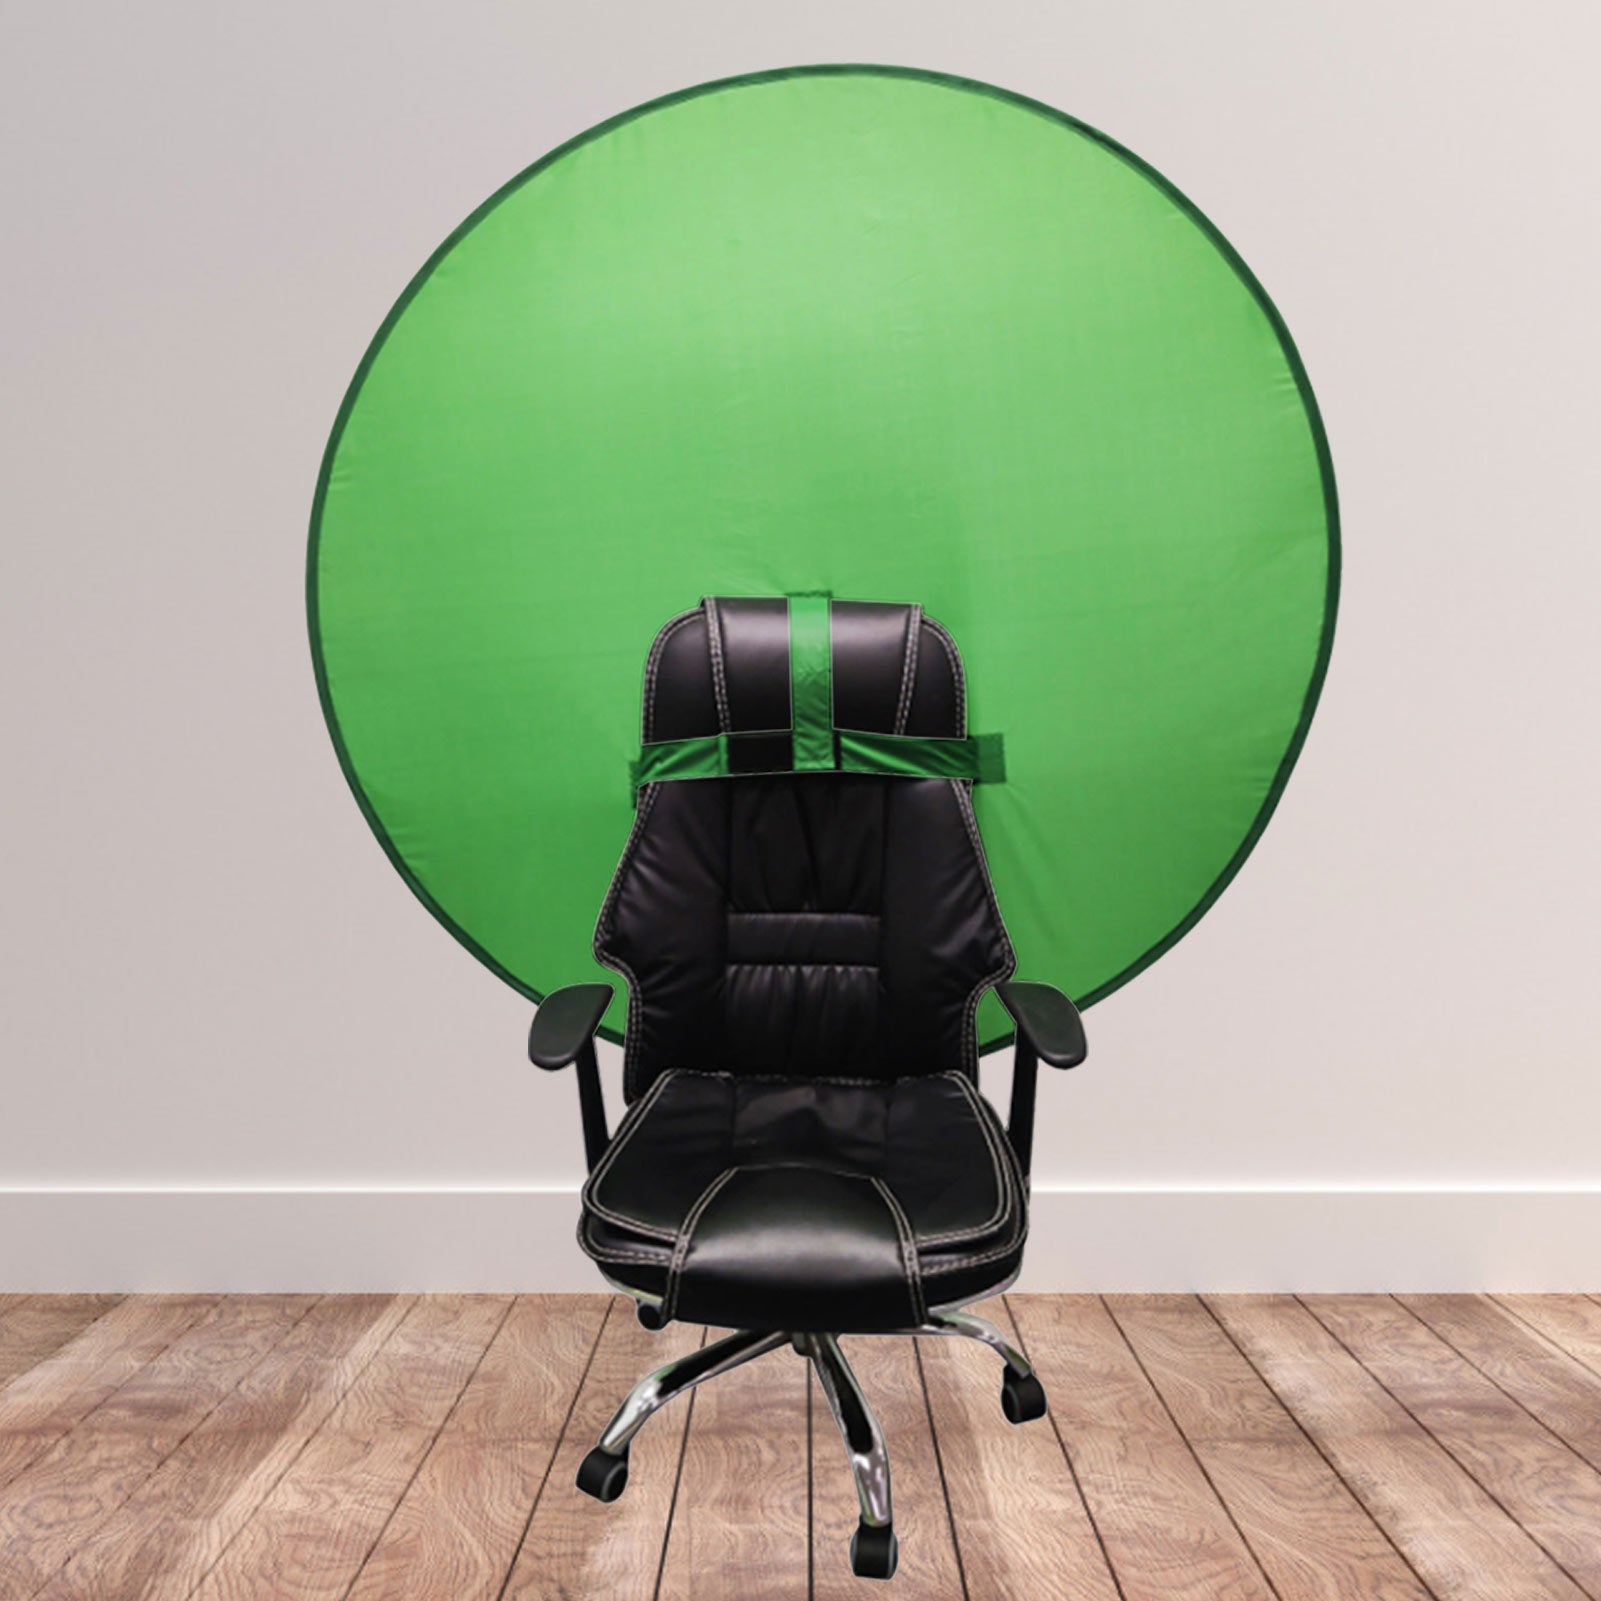 Green Screen Photography Props Portable Chroma Key Background Photos Suitable For Video Studio - KeysCaps